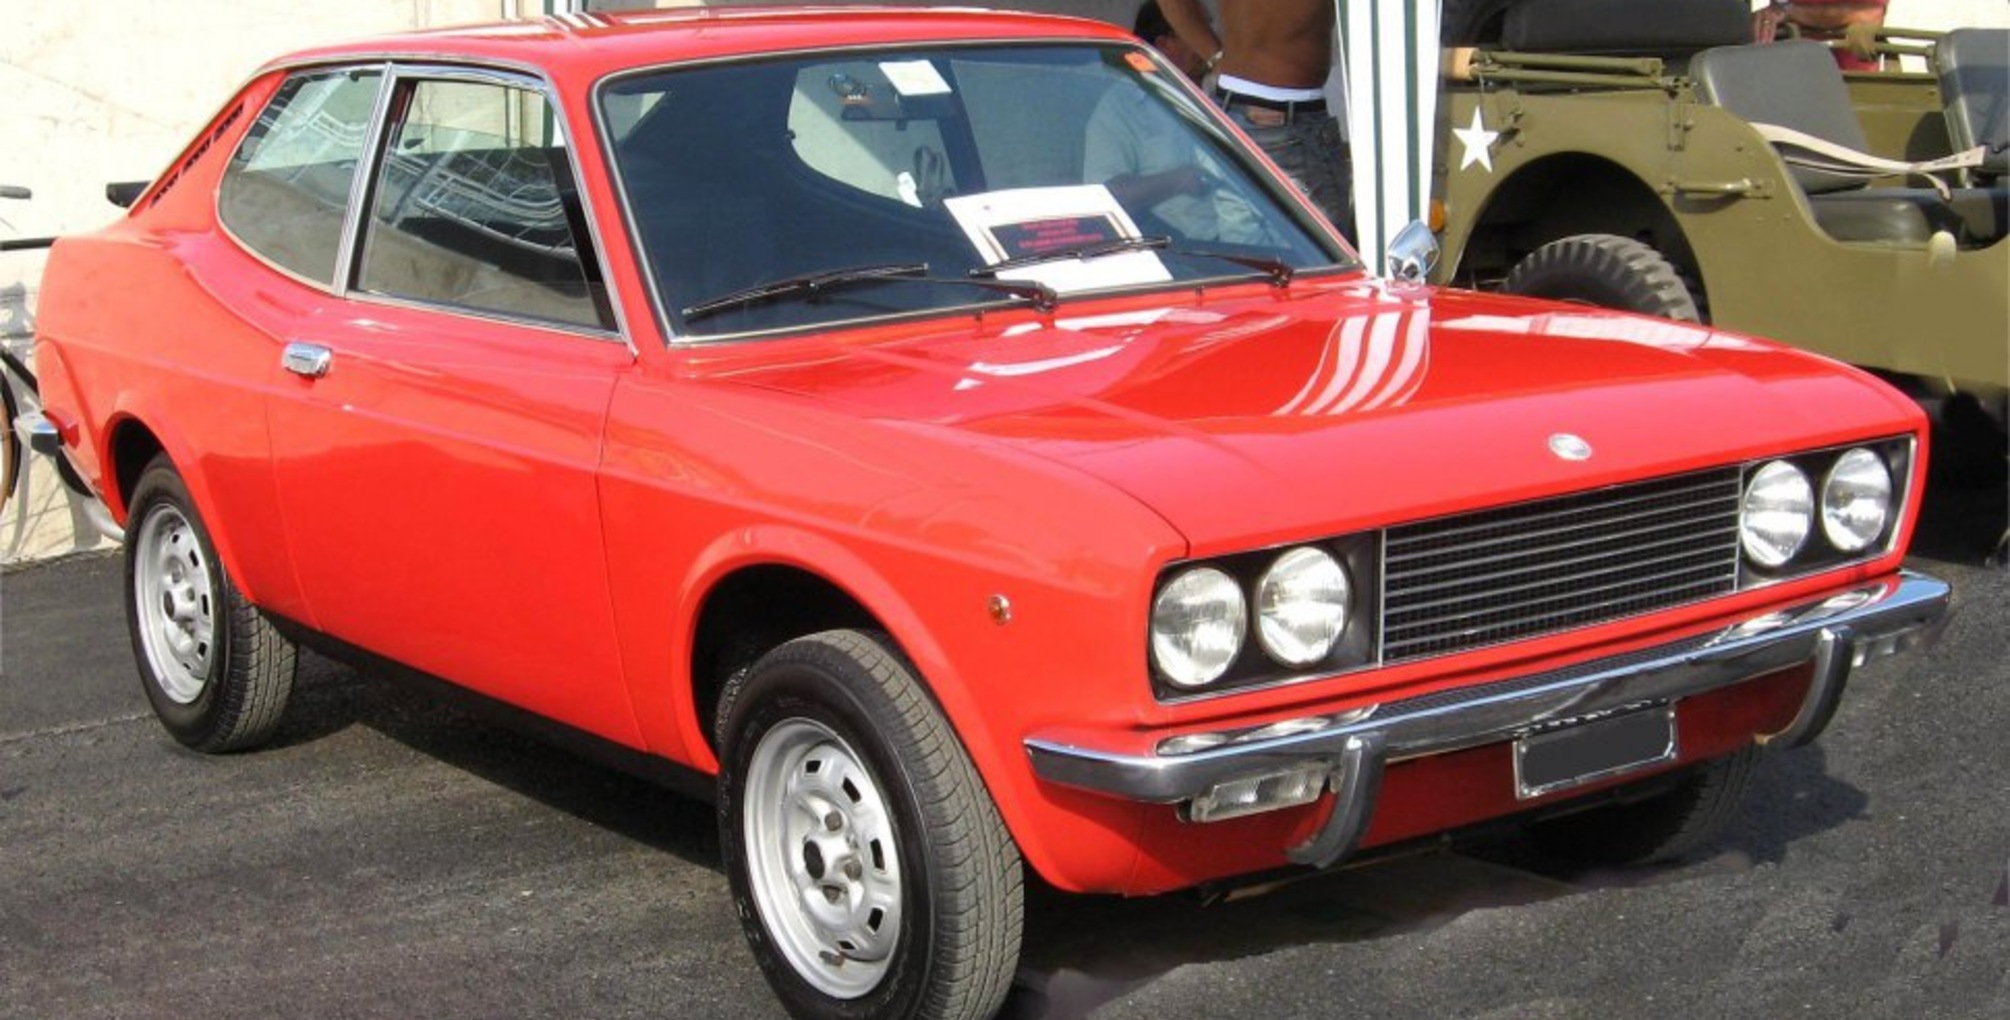 Fiat 128 Coupe 1.1 (AC 5) (64 Hp) 1972, 1973, 1974, 1975, 1976, 1977, 1978, 1979, 1980, 1981 